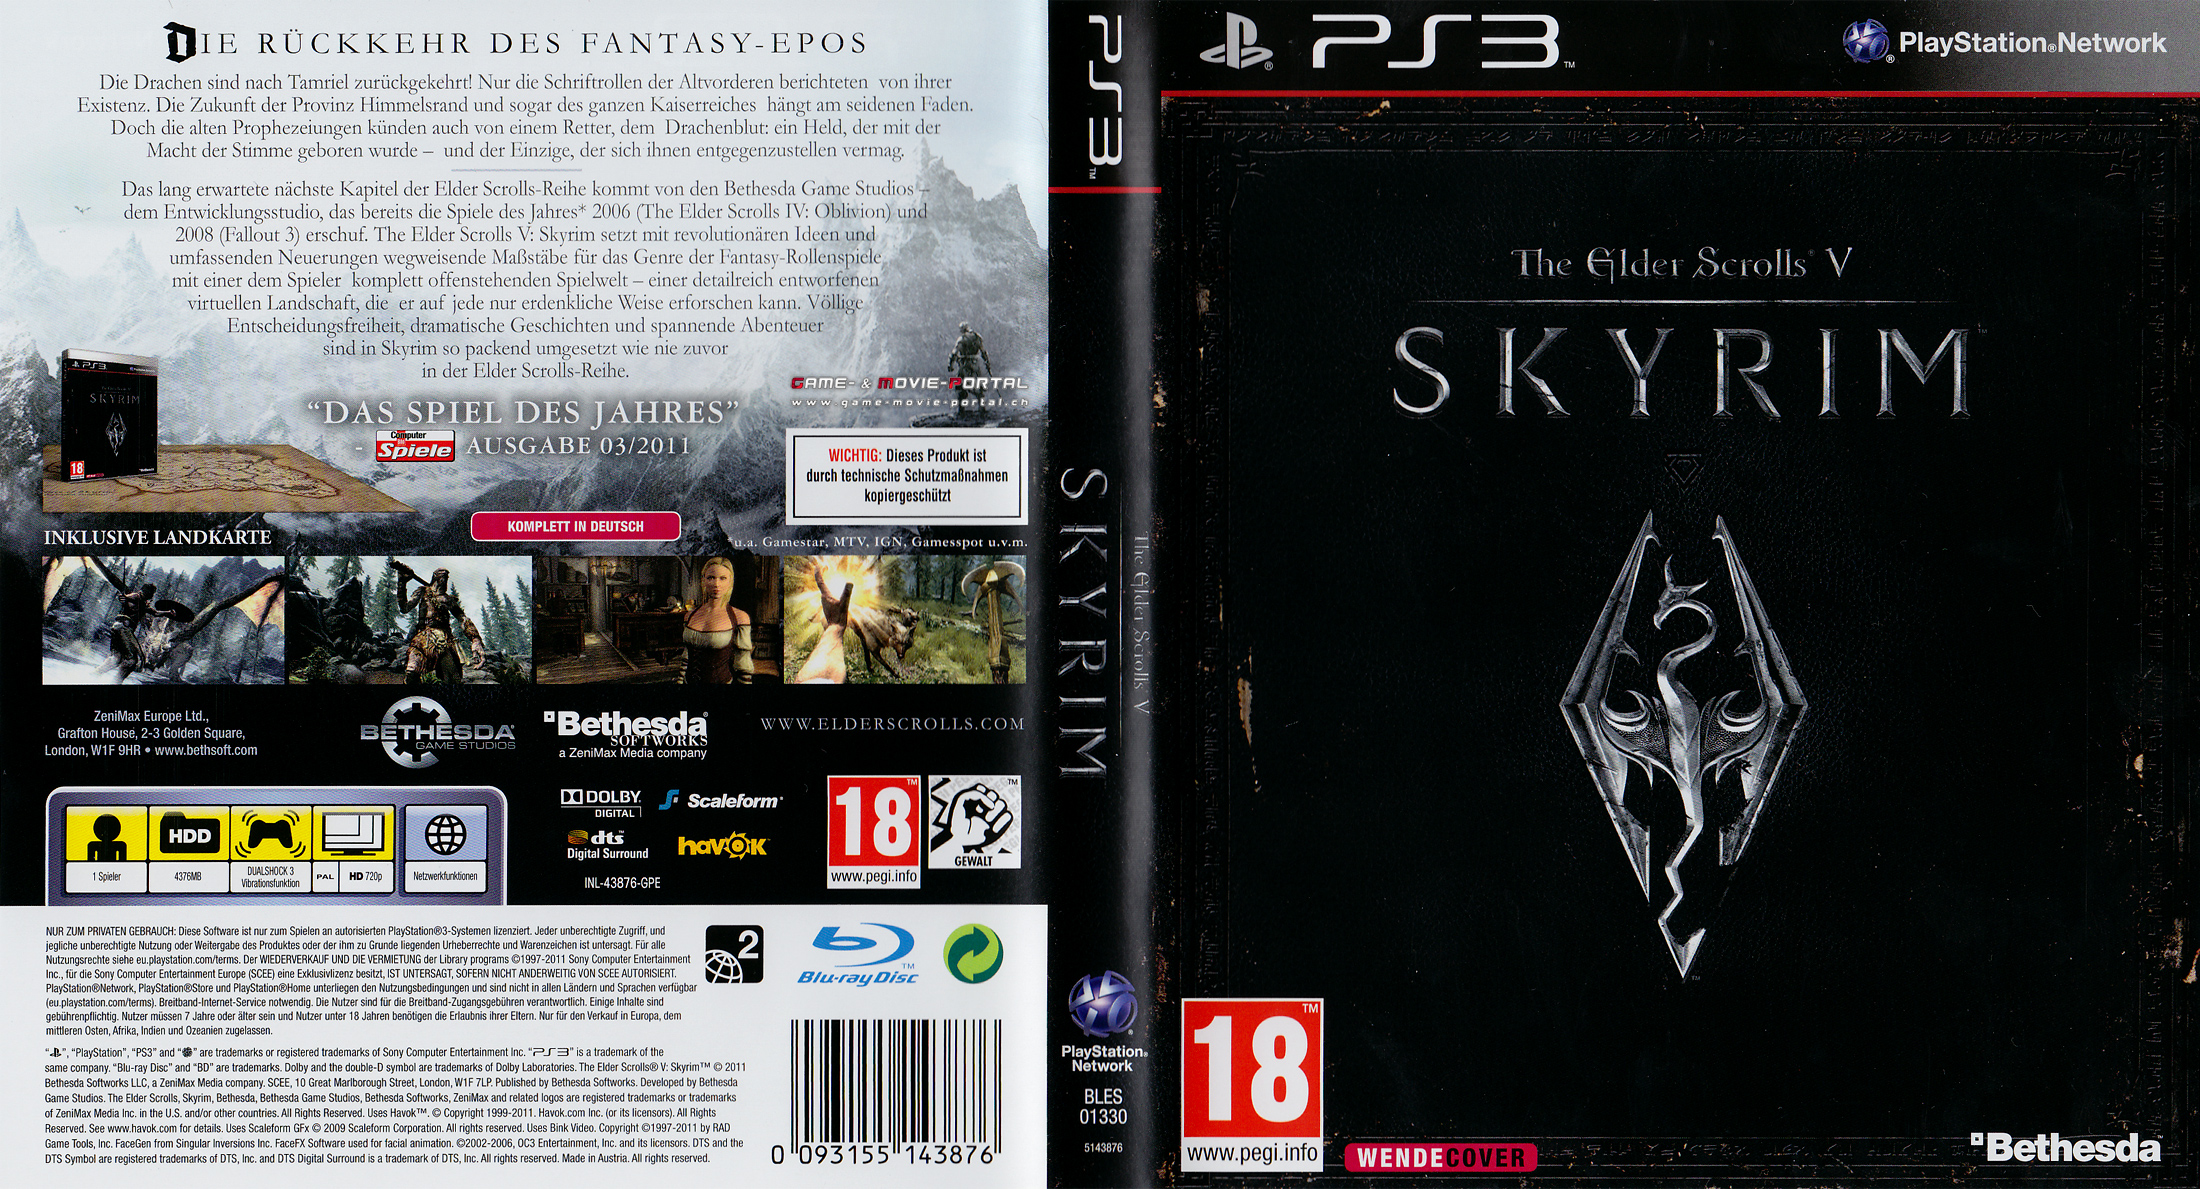 The Elder Scrolls V Skyrim Playstation 3 Covers Cover Century Over 500 000 Album Art Covers For Free